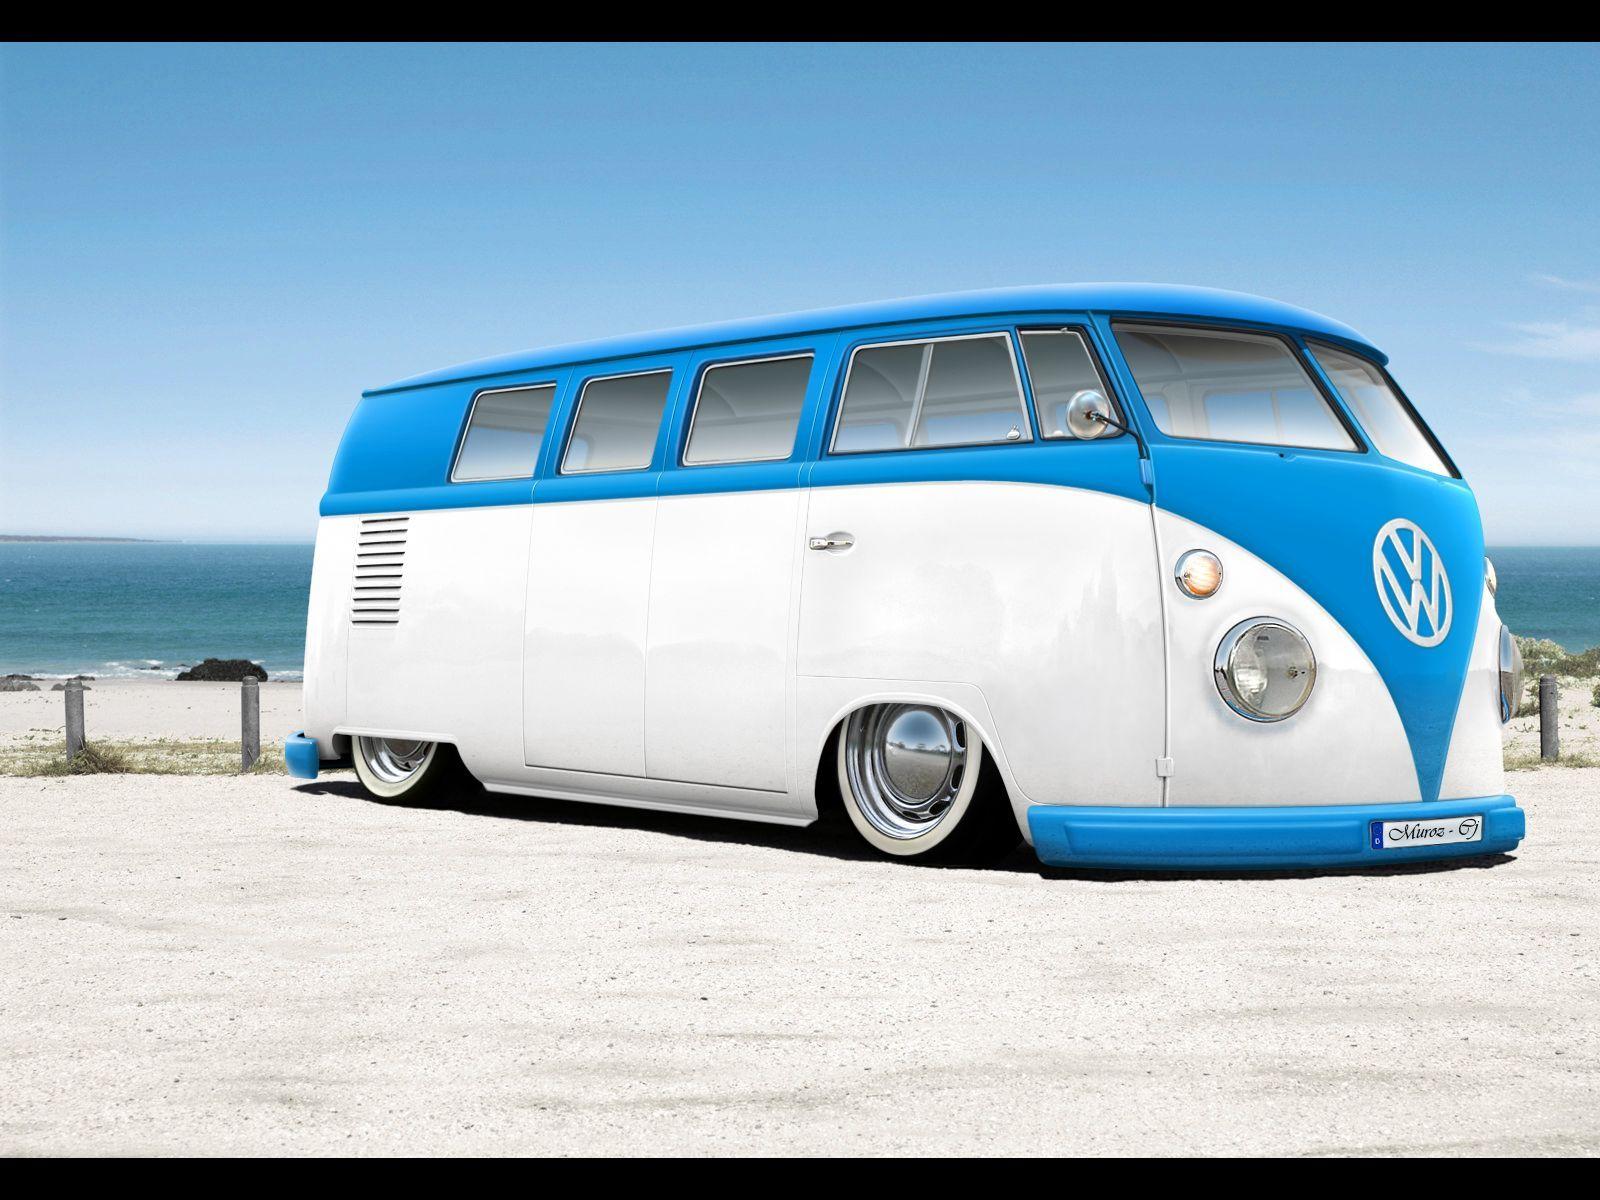 To Download or Set this Free Bus vw HD Wallpaper as the Desktop